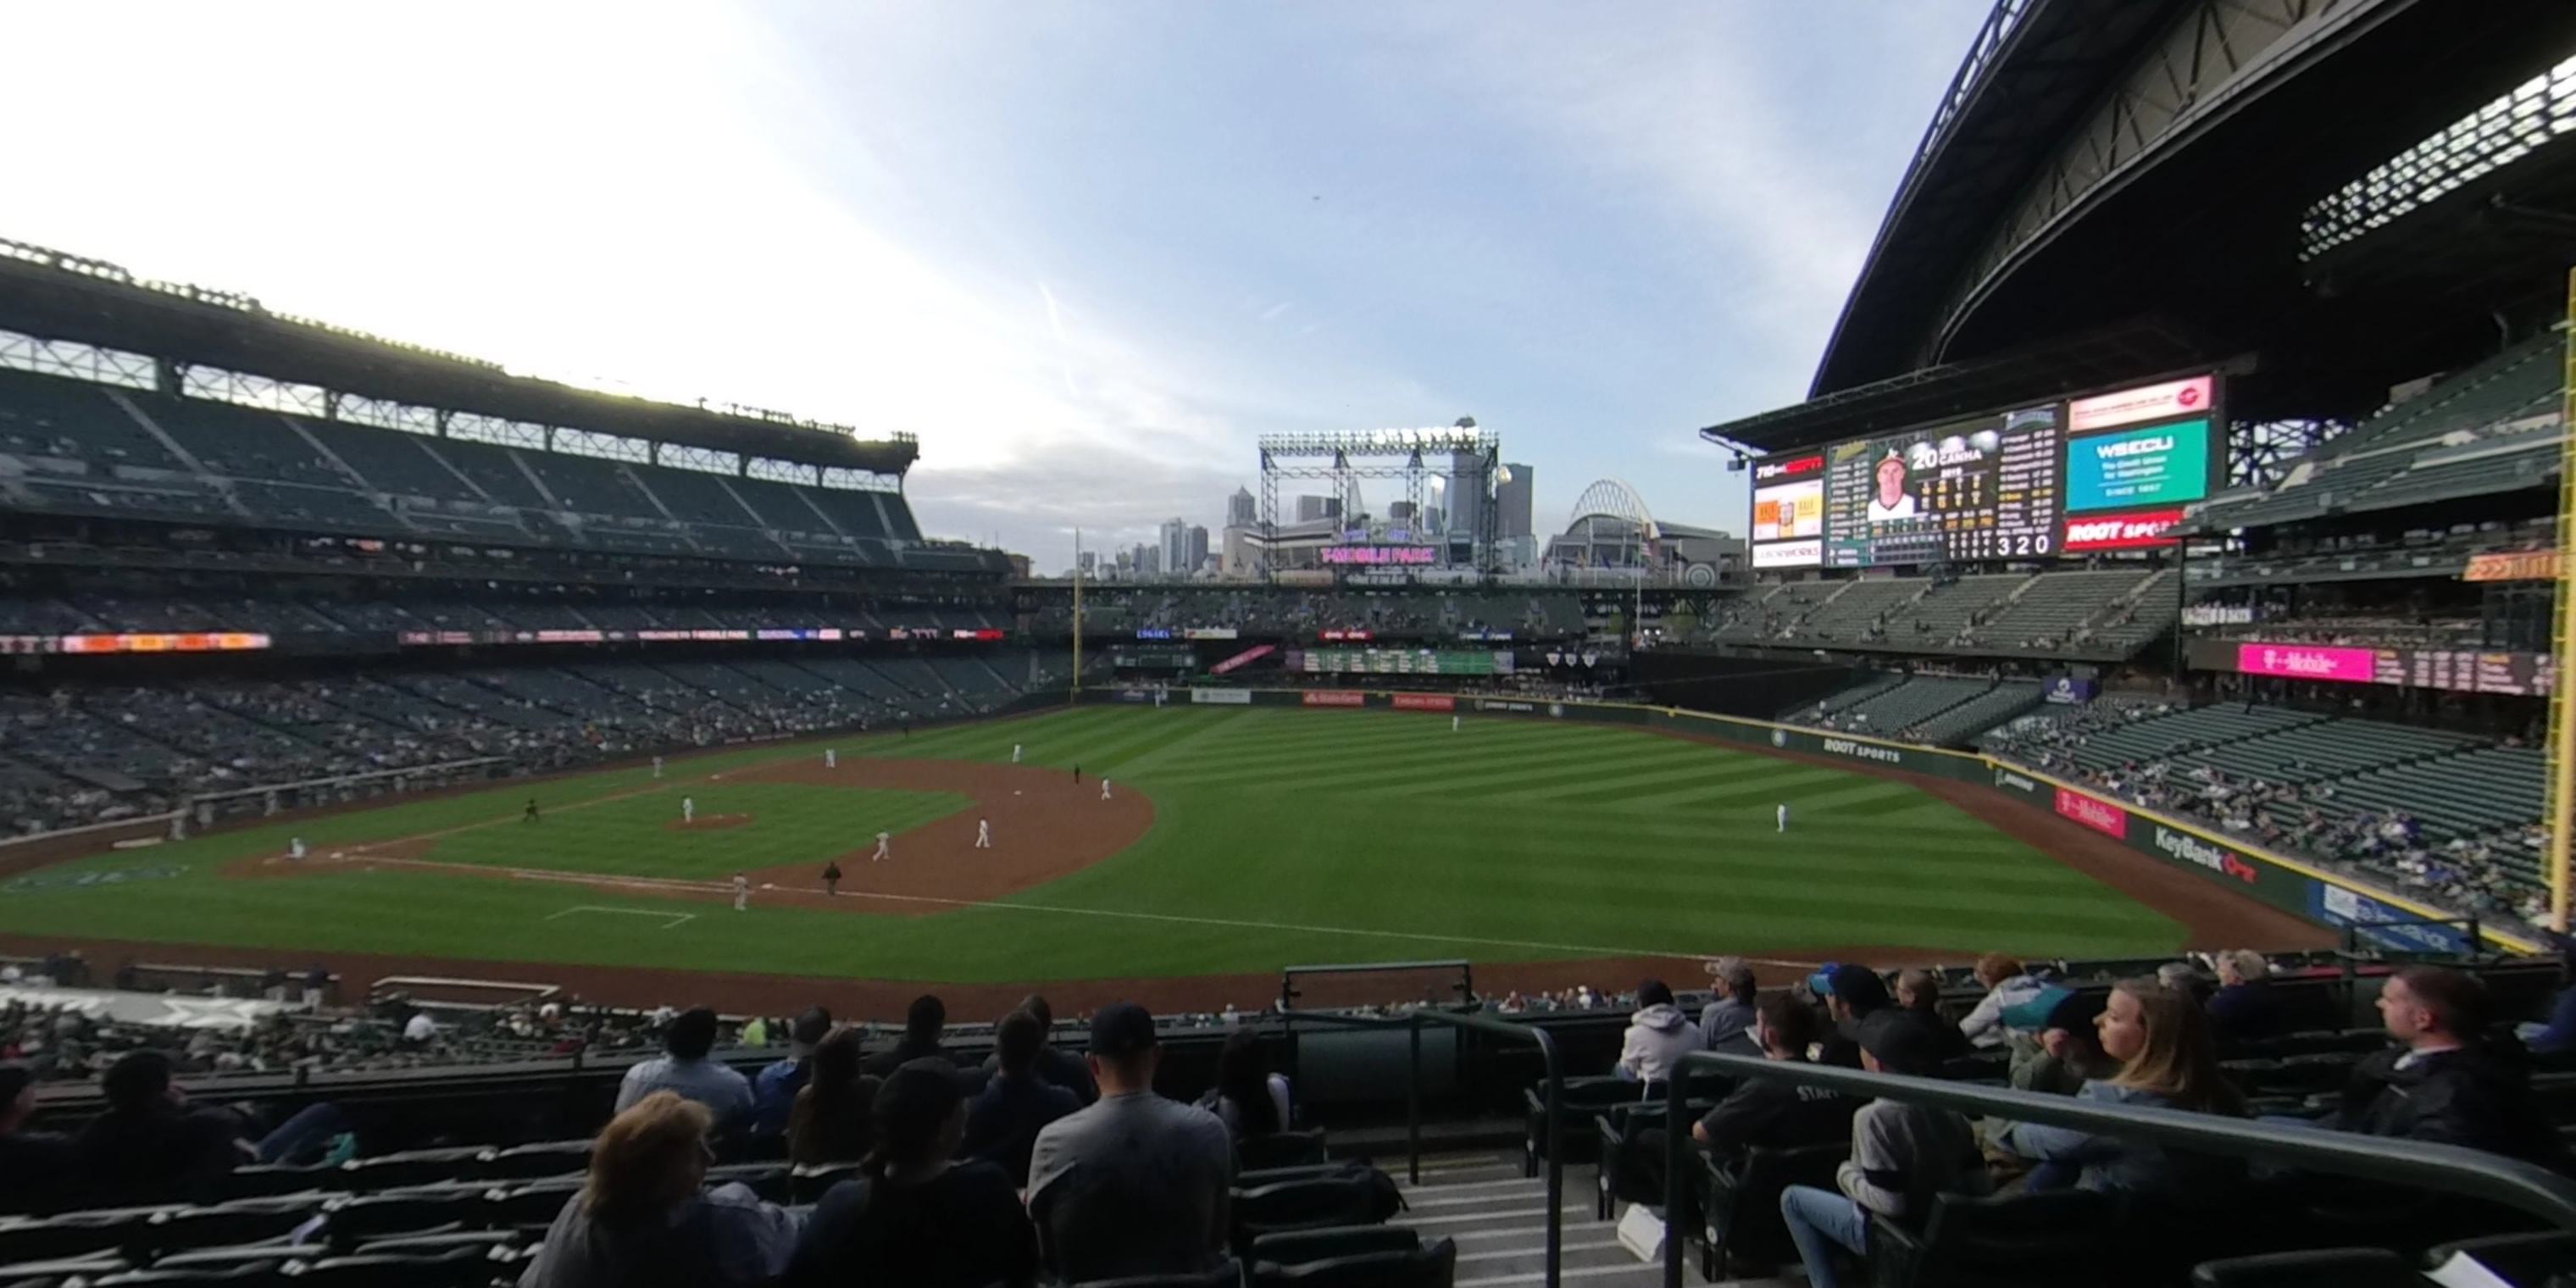 section 217 panoramic seat view  for baseball - t-mobile park